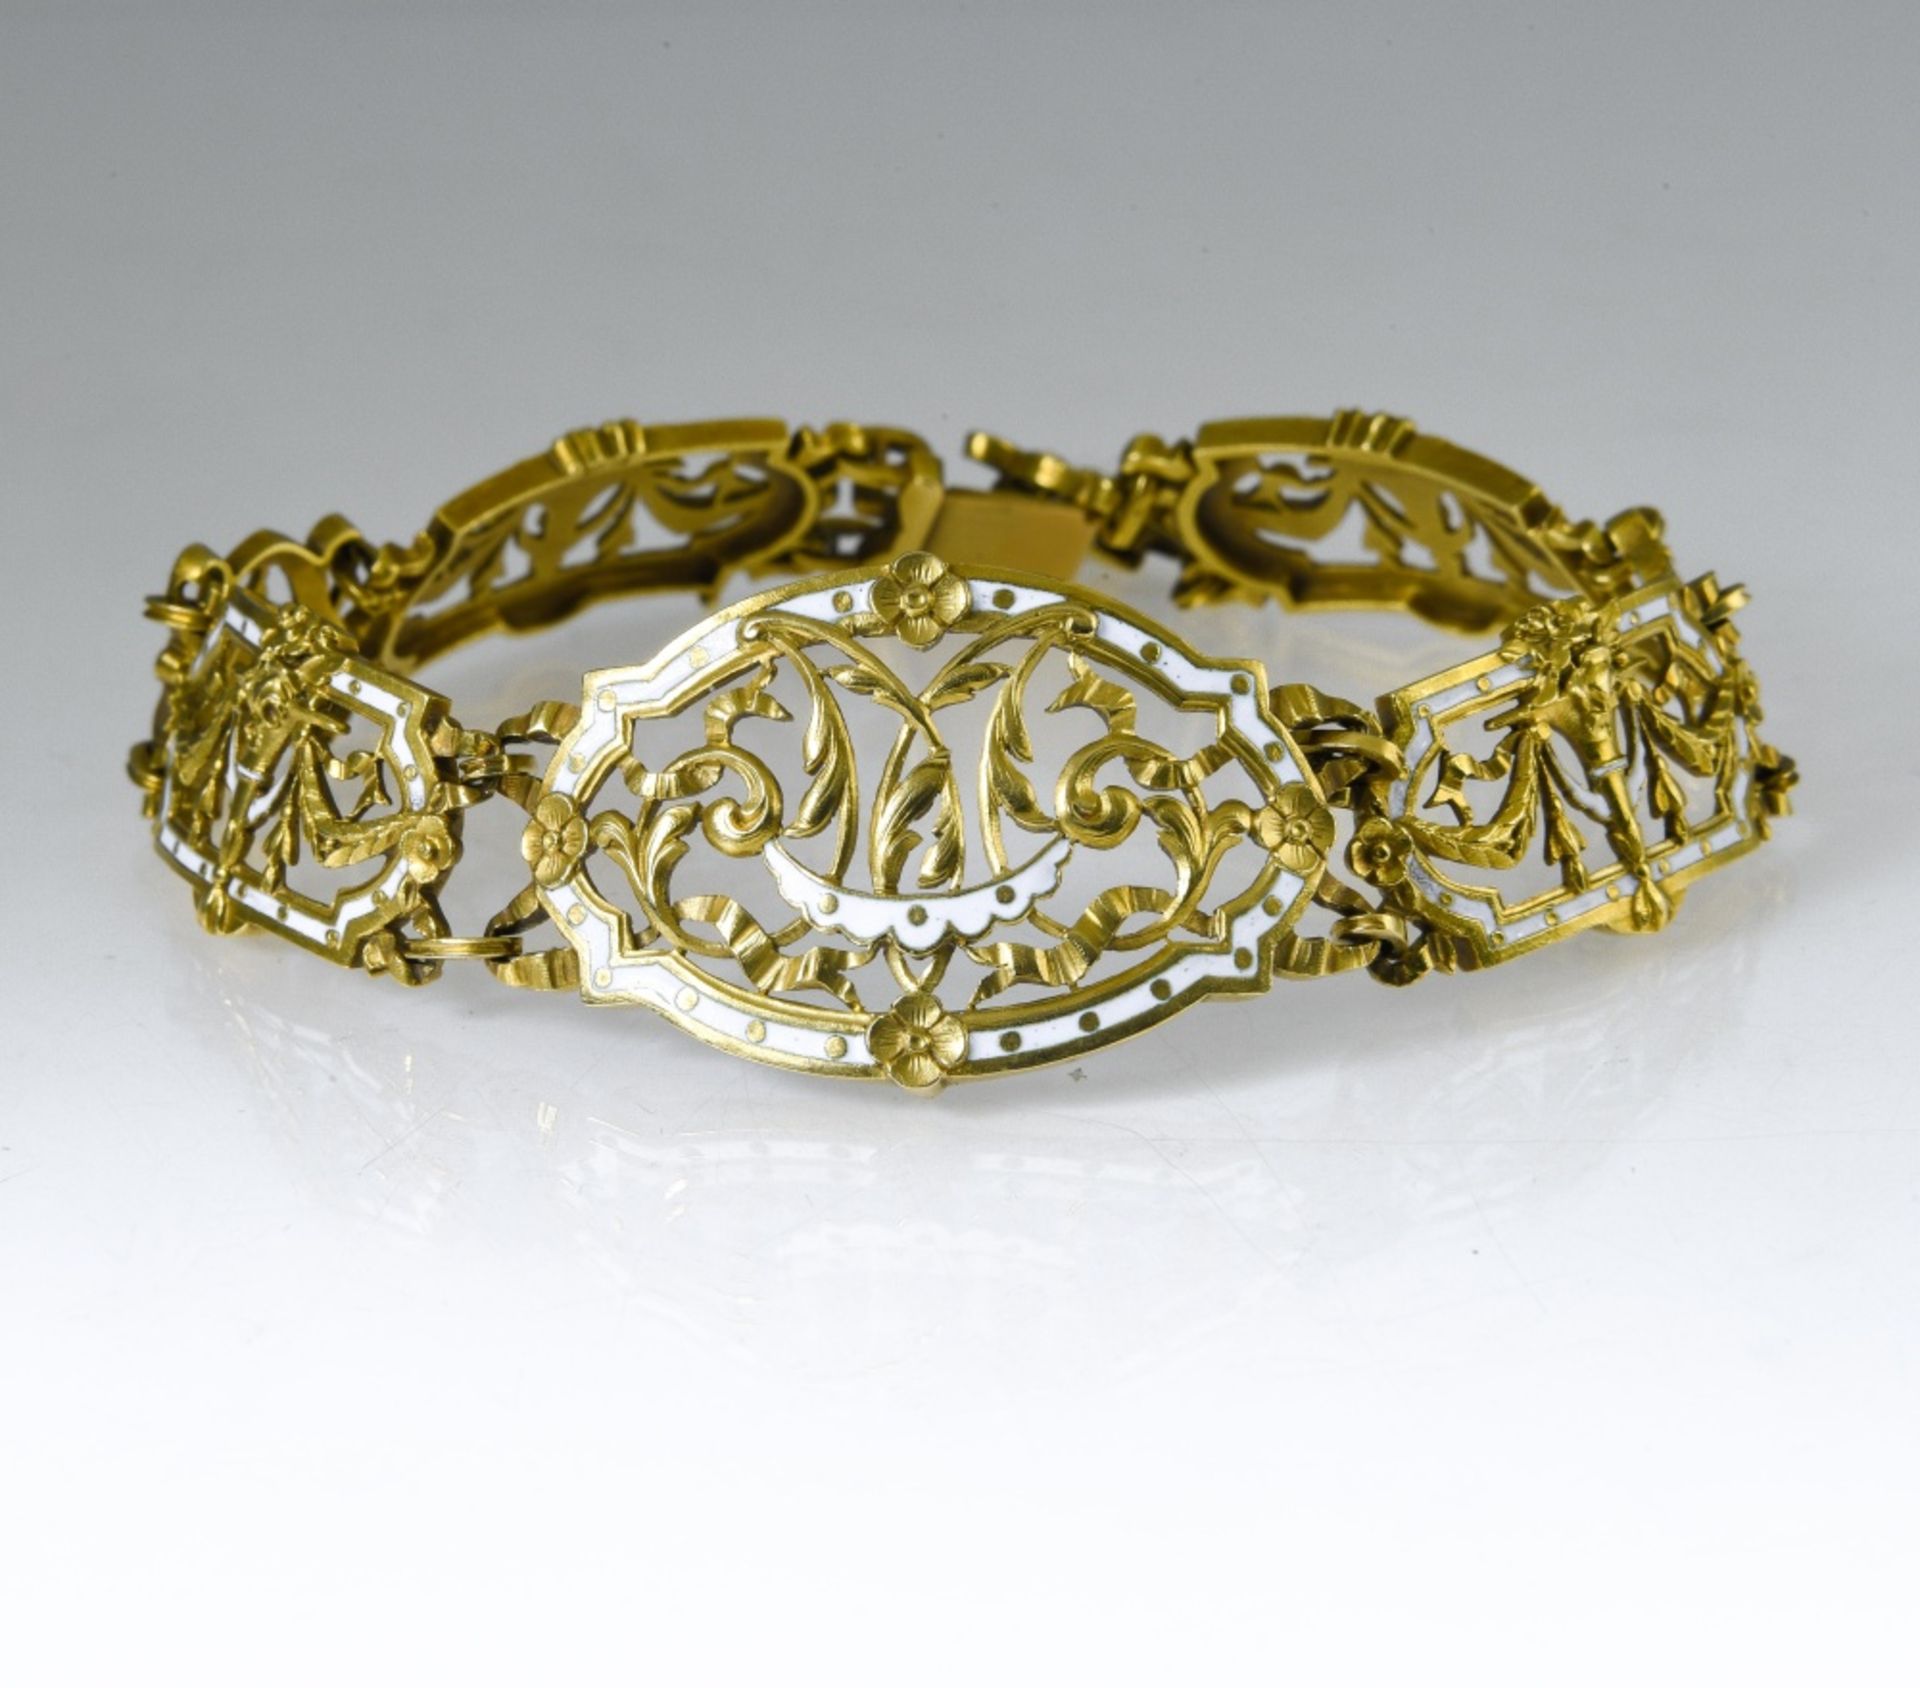 Lucien Gautrait Neoclassical bracelet 18 kt yellow gold, inlaid with white enamel, composed of 4